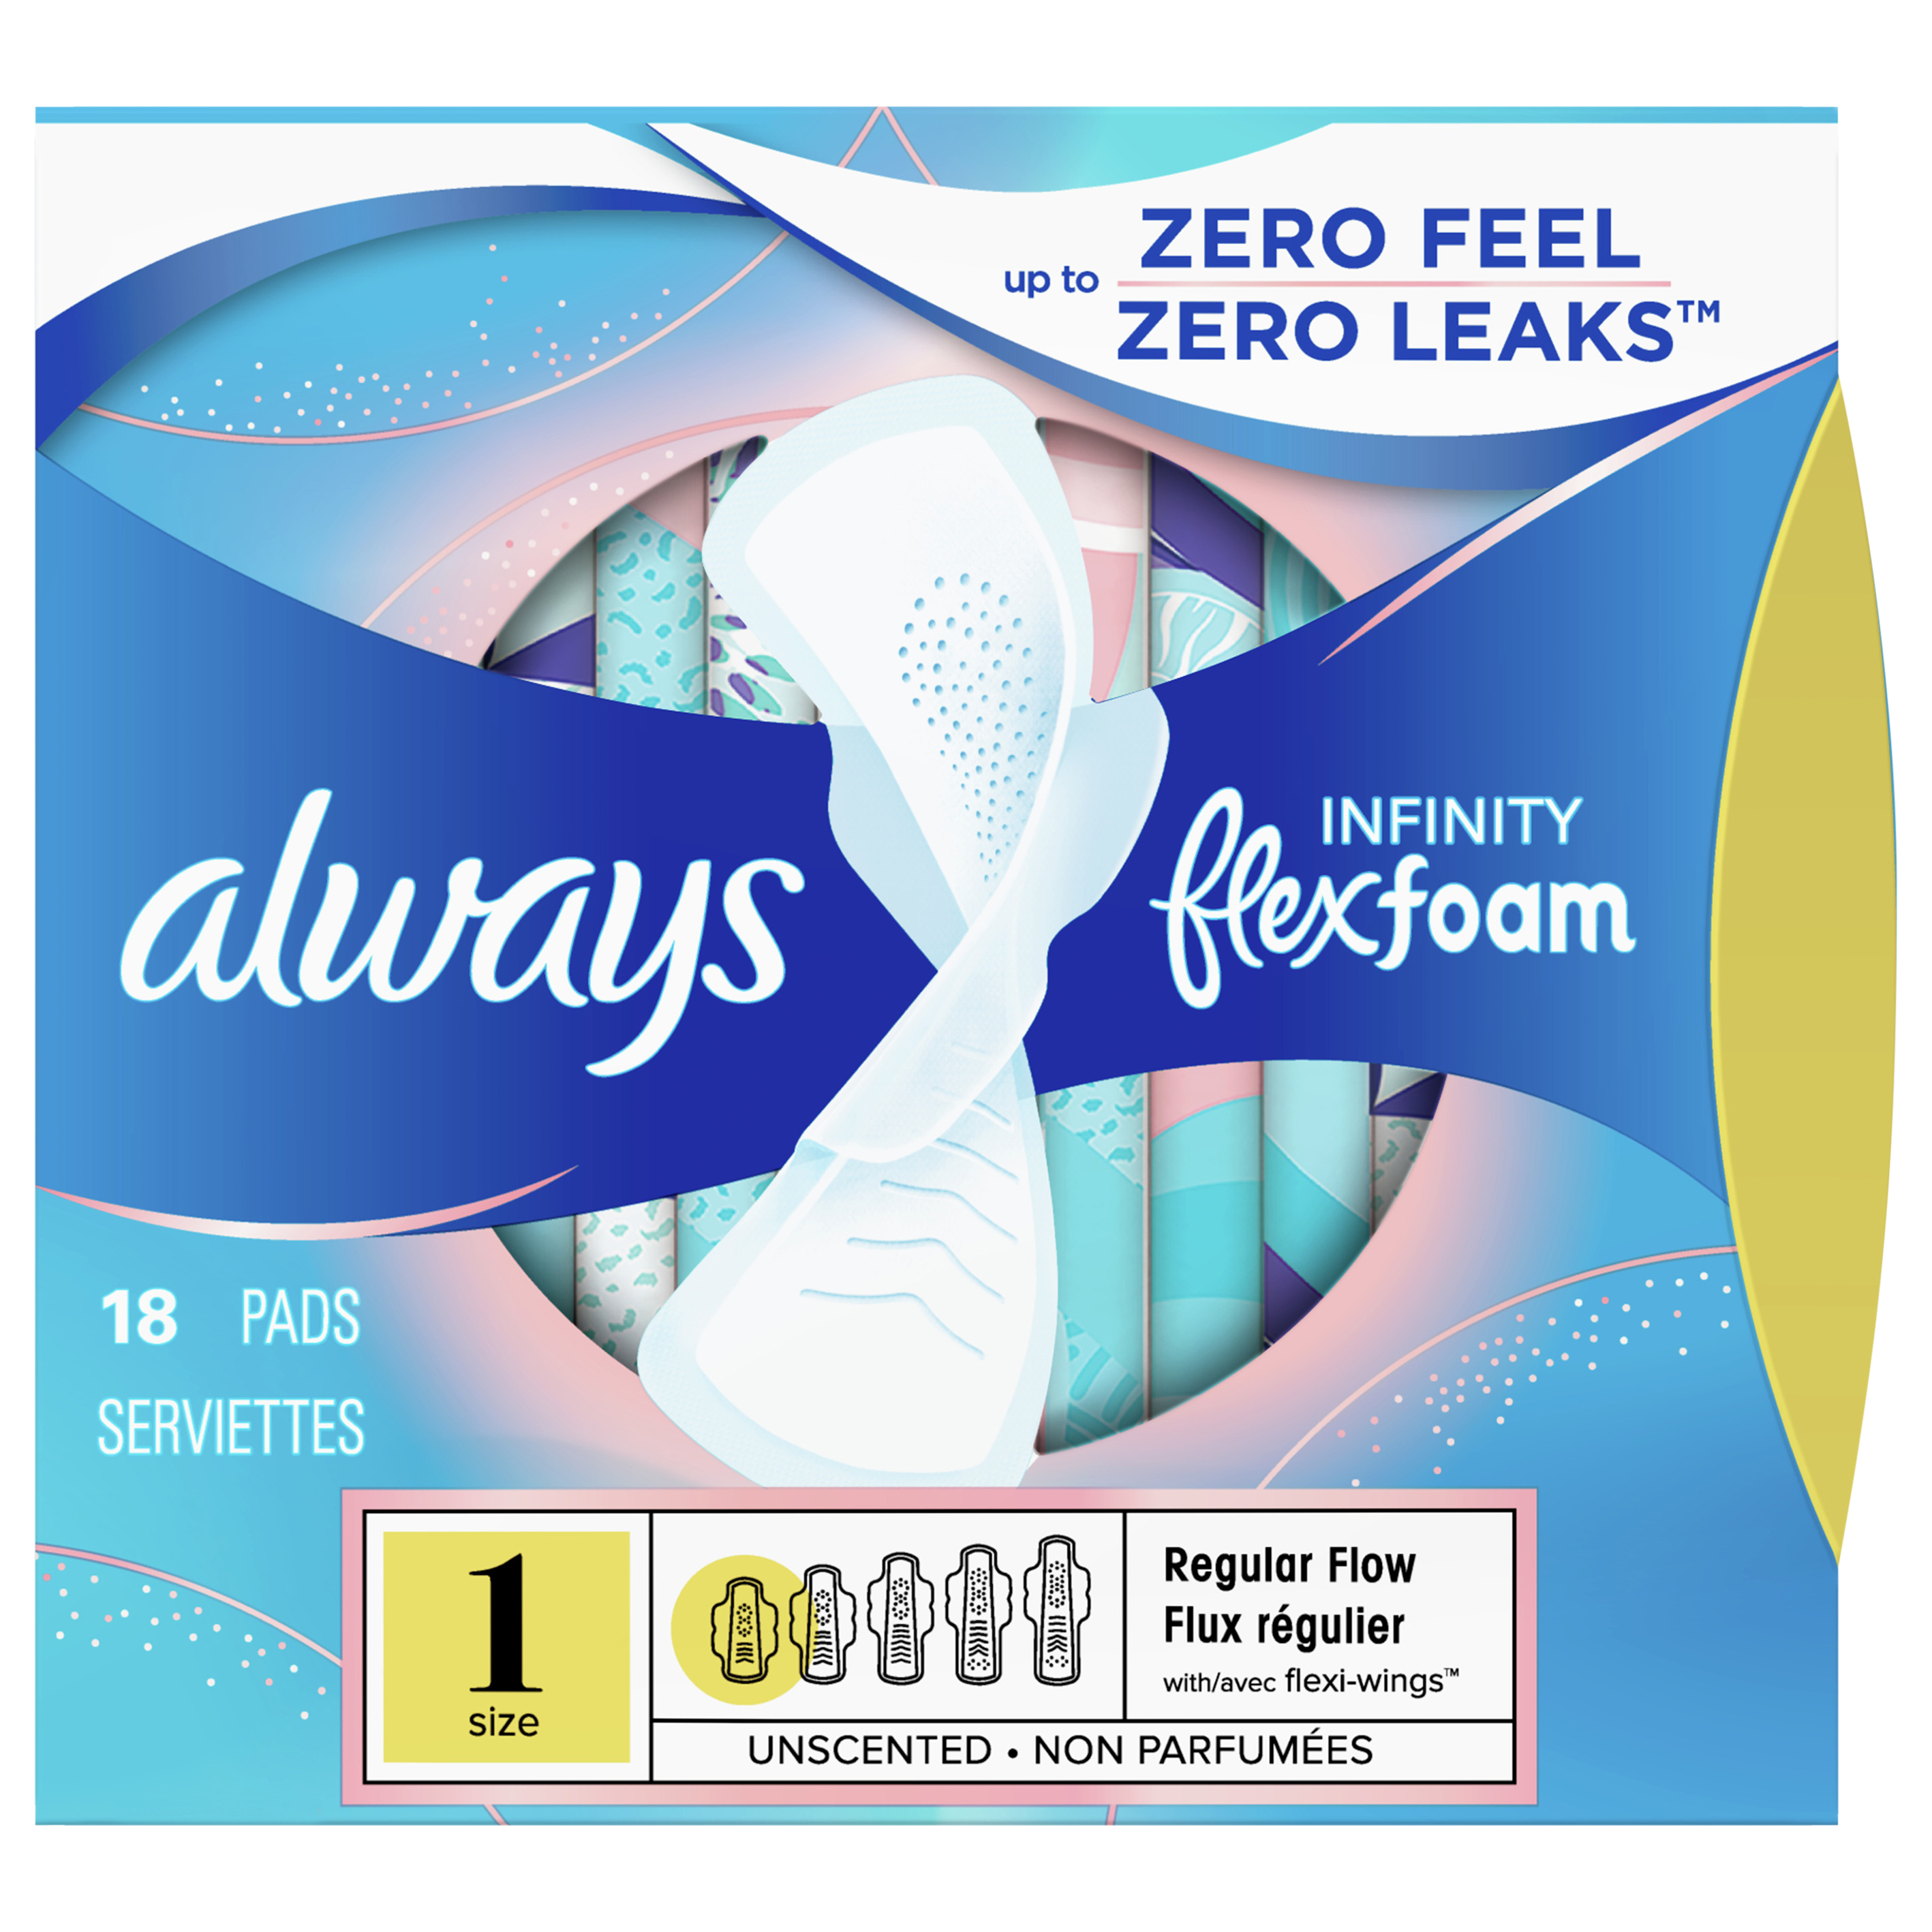 Mosers Foods : Always Infinity FlexFoam Pads for Women Size 1 Regular  Absorbency, Zero Leaks and Zero Feel is possible, with Wings Unscented, 18  Count